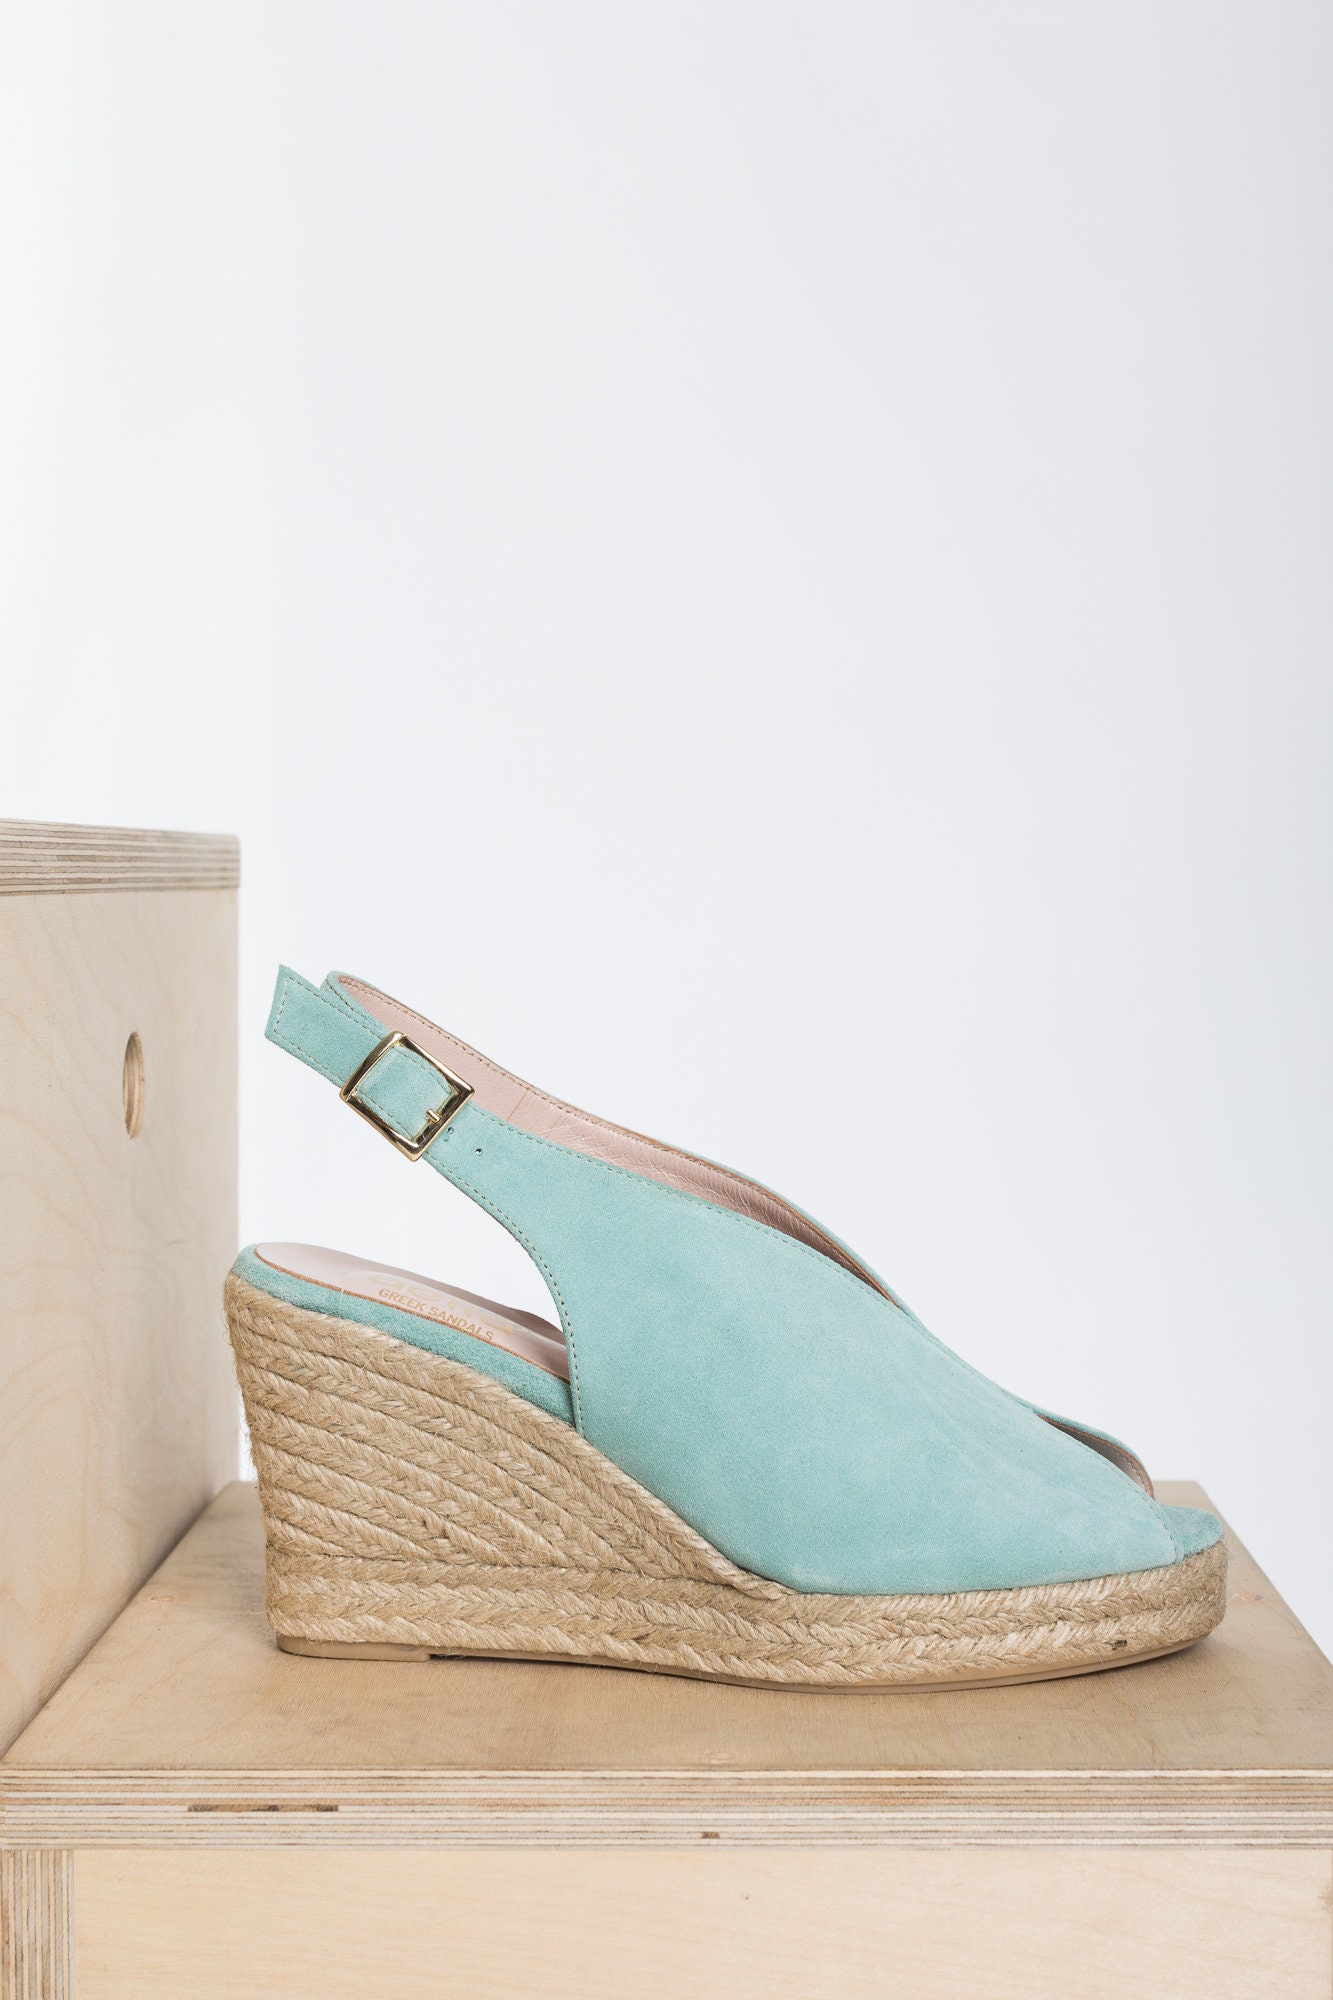 Mint Wedge Espdrilles tulip suede leather | Etsy